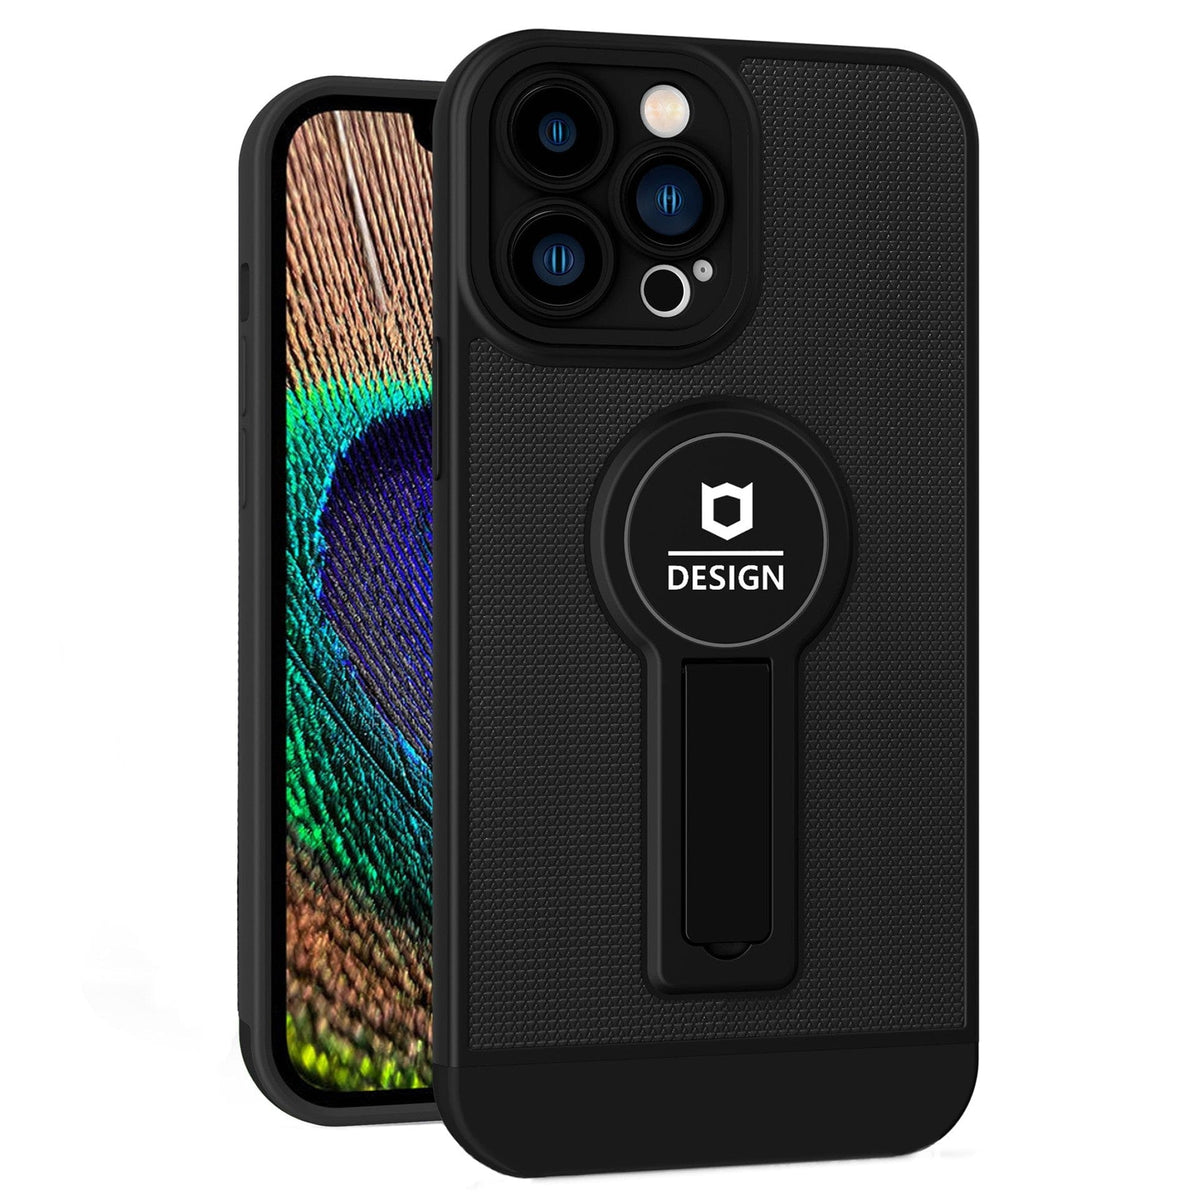 Husa Armor Design cu Stand pentru SAMSUNG GALAXY A52 / A52 5G / A52S 5G, Negru, Suport Auto Magnetic, Wireless Charge, Protectie Antisoc